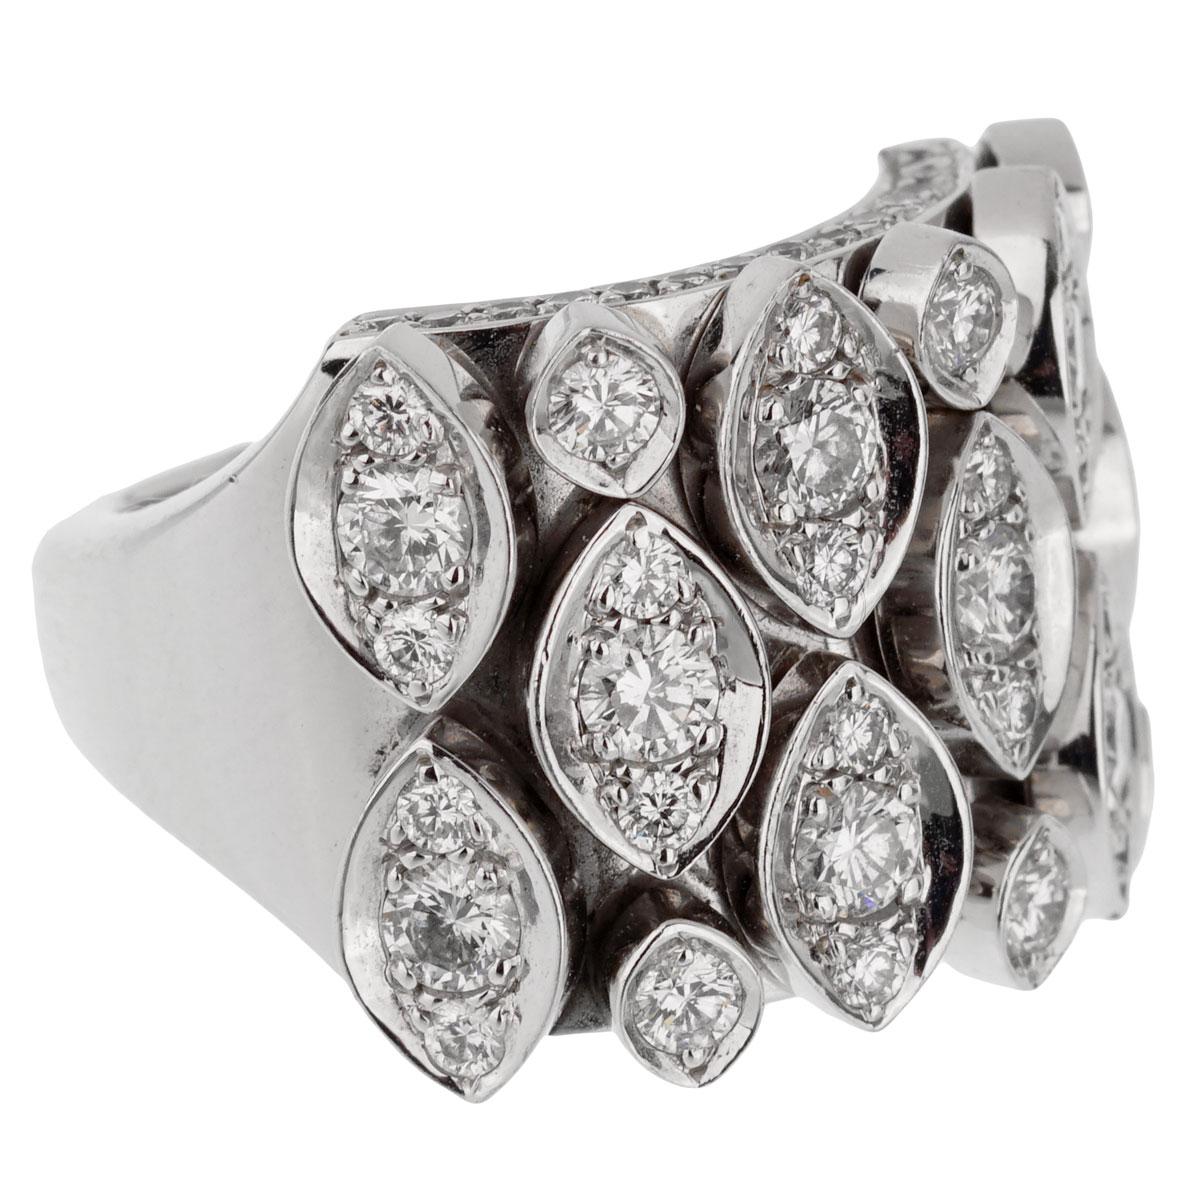 An incredible Cartier Diadea diamond ring in 18k white gold adorned with appx 1.5ct of the finest Cartier round brilliant cut diamonds. 

The ring measures a size 51 eu / US 5 1/2 and can be resized